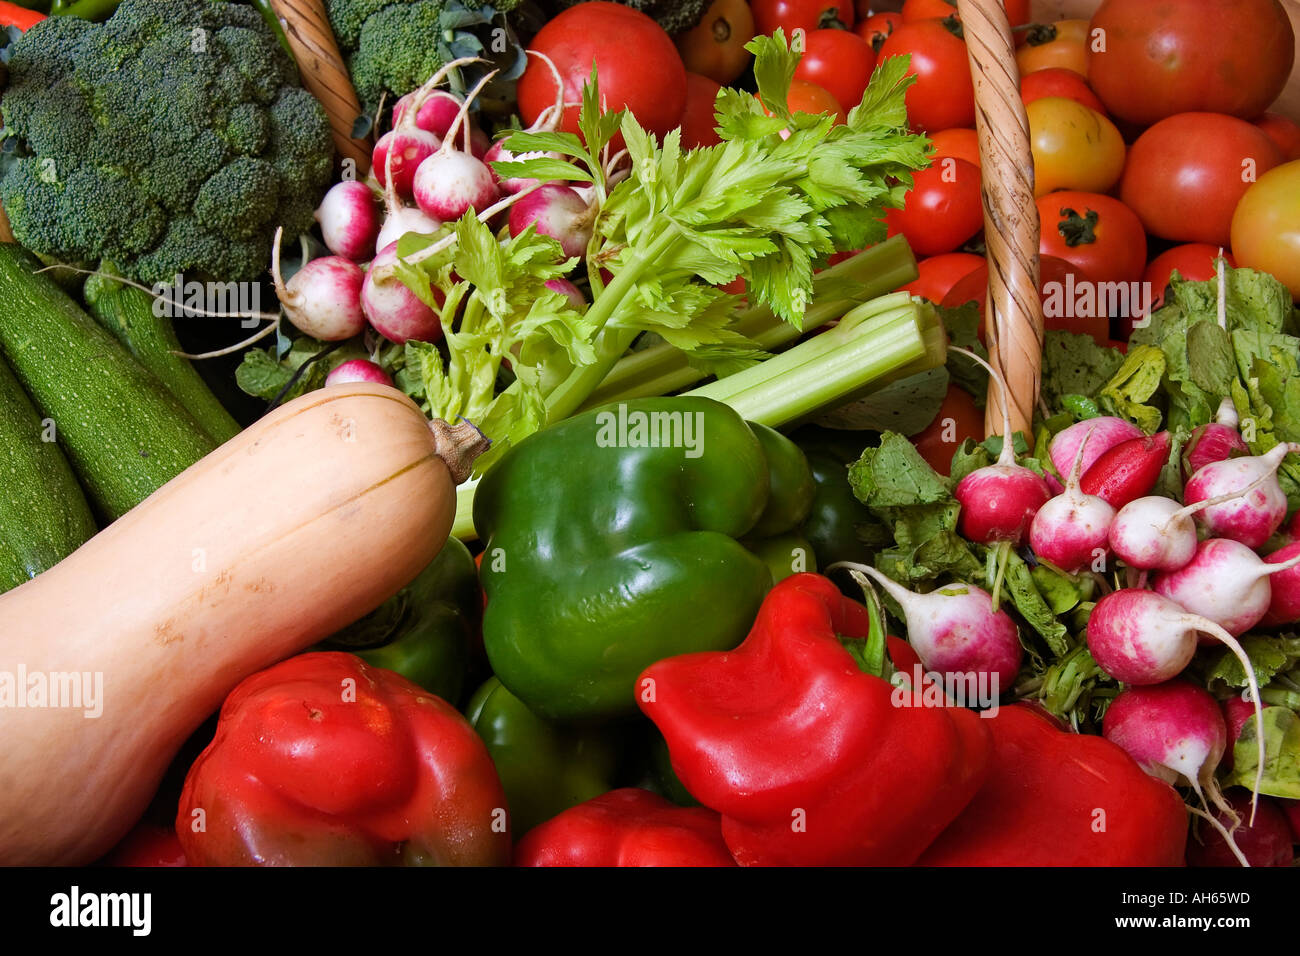 fruits and vegetables coming from cultivation of ecological agriculture celery radish tomato pepper pumpkin marrow brecol Stock Photo